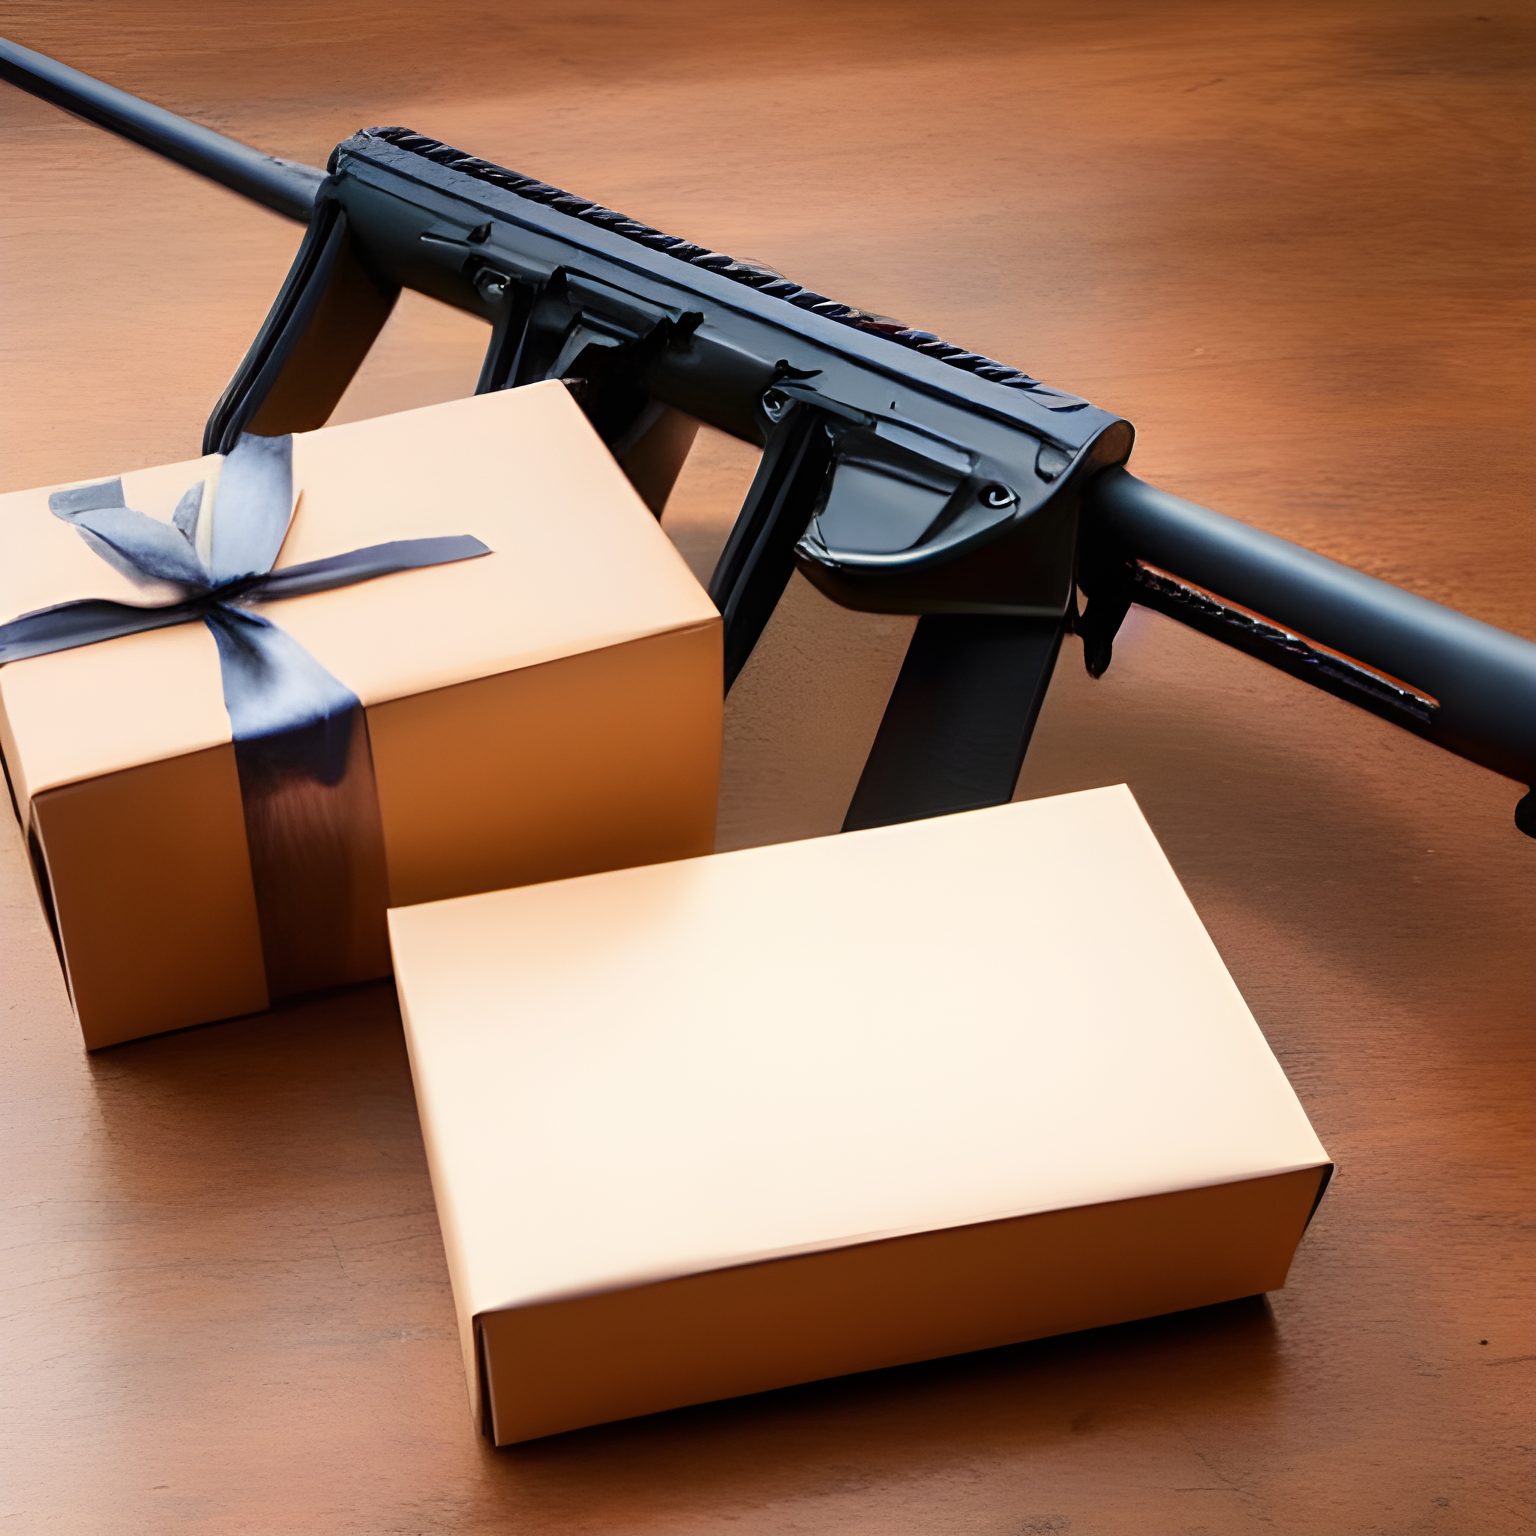 An Automatic Rifle and a small gift box besides it - gifts for gun lovers